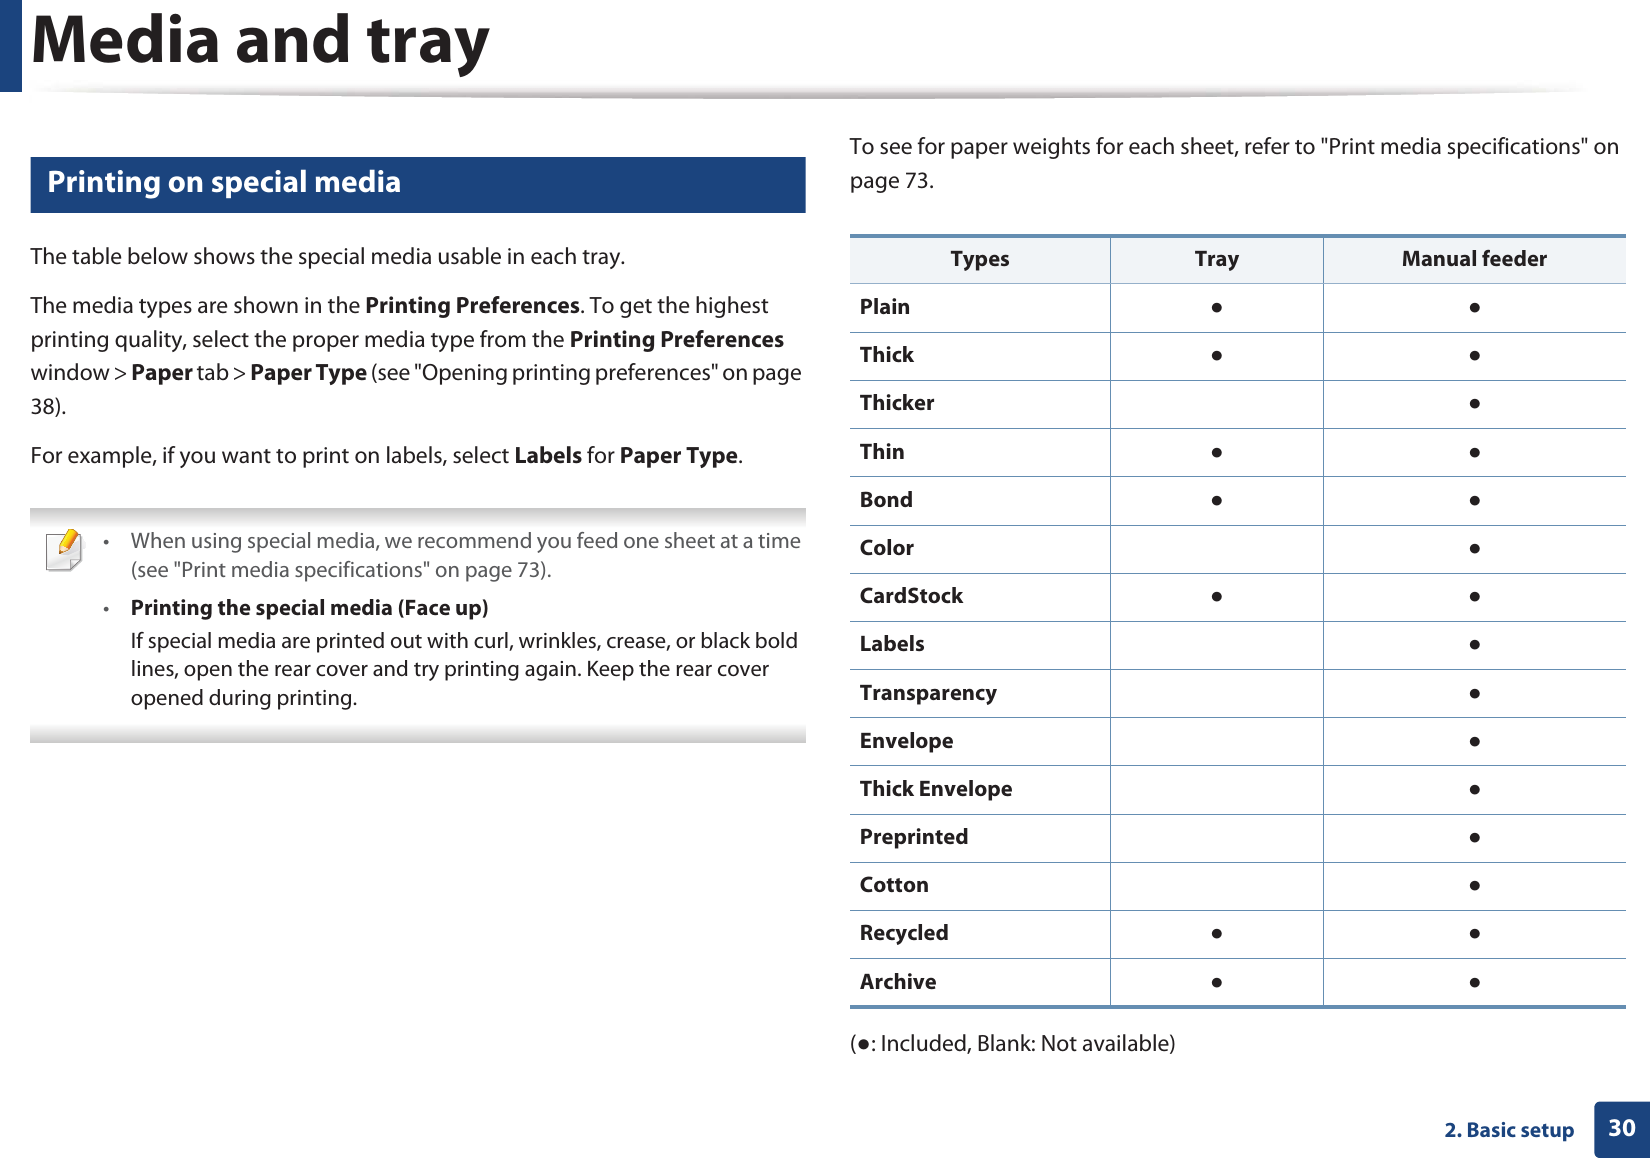 Media and tray302. Basic setup4 Printing on special mediaThe table below shows the special media usable in each tray.The media types are shown in the Printing Preferences. To get the highest printing quality, select the proper media type from the Printing Preferences window &gt; Paper tab &gt; Paper Type (see &quot;Opening printing preferences&quot; on page 38).For example, if you want to print on labels, select Labels for Paper Type. • When using special media, we recommend you feed one sheet at a time (see &quot;Print media specifications&quot; on page 73).•Printing the special media (Face up)If special media are printed out with curl, wrinkles, crease, or black bold lines, open the rear cover and try printing again. Keep the rear cover opened during printing.  To see for paper weights for each sheet, refer to &quot;Print media specifications&quot; on page 73.(Ɣ: Included, Blank: Not available) Types Tray  Manual feederPlain ƔƔThick  ƔƔThicker  ƔThin  ƔƔBond ƔƔColor  ƔCardStock ƔƔLabels ƔTransparency ƔEnvelope ƔThick Envelope ƔPreprinted  ƔCotton ƔRecycled ƔƔArchive ƔƔ